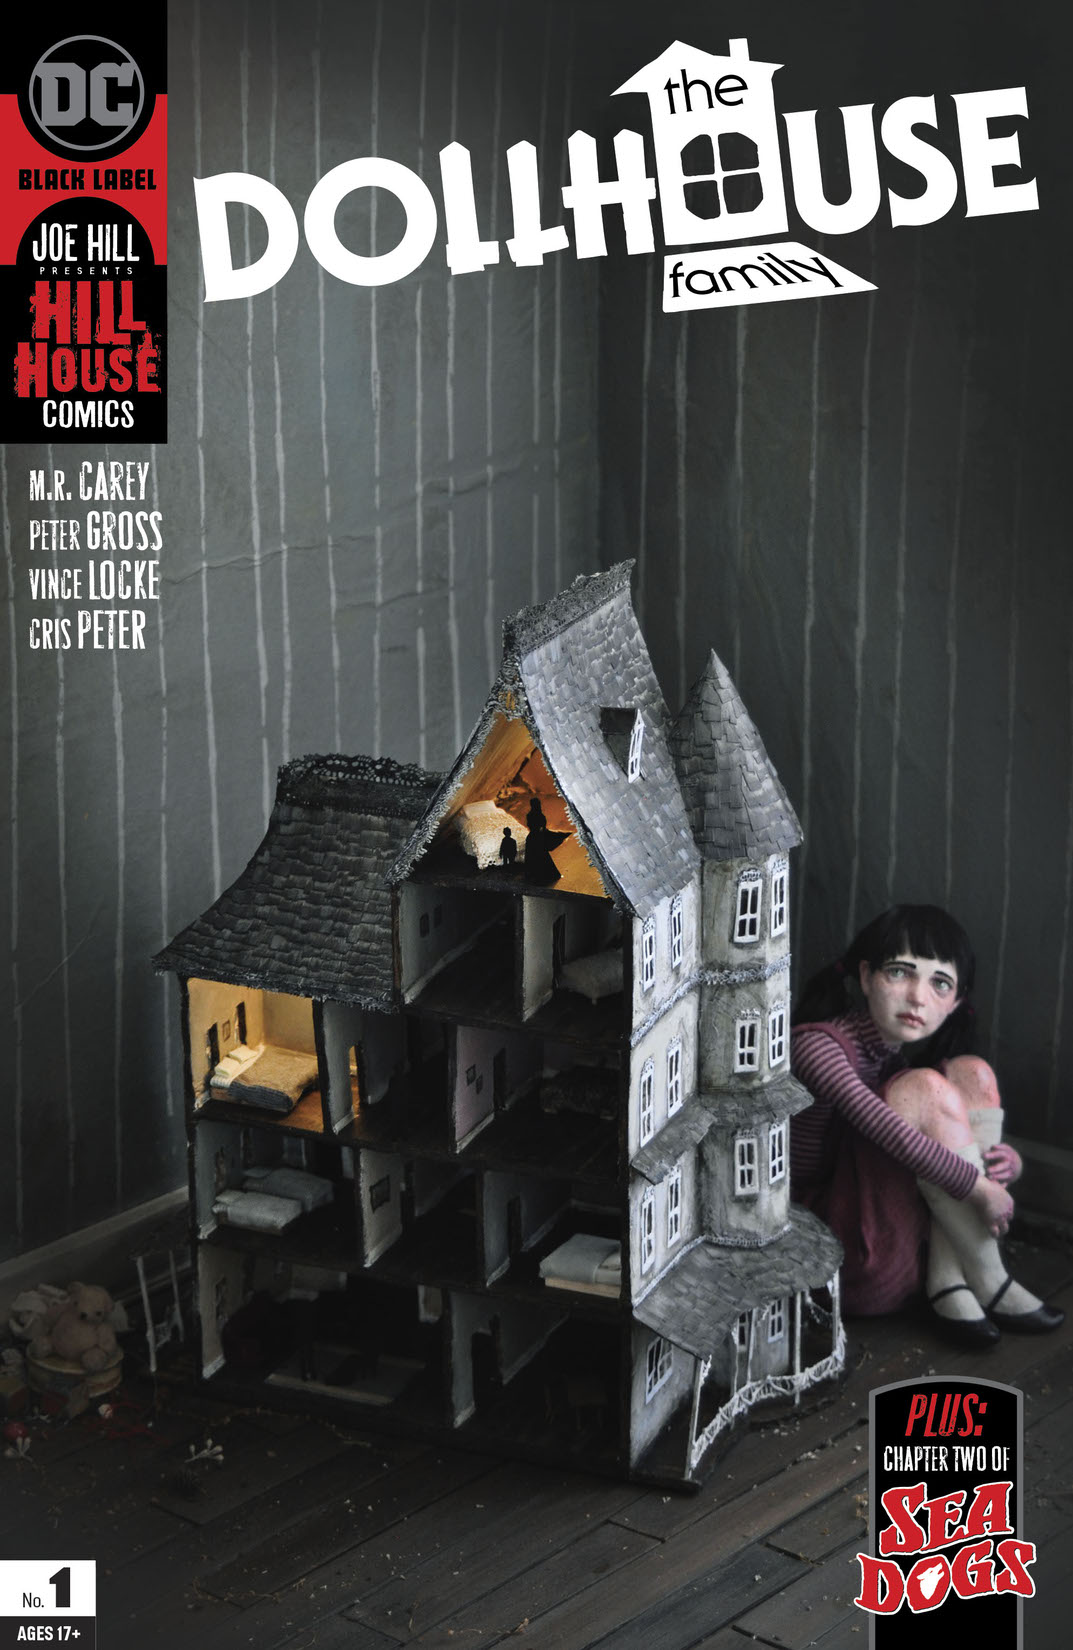 The Dollhouse Family #1 preview images